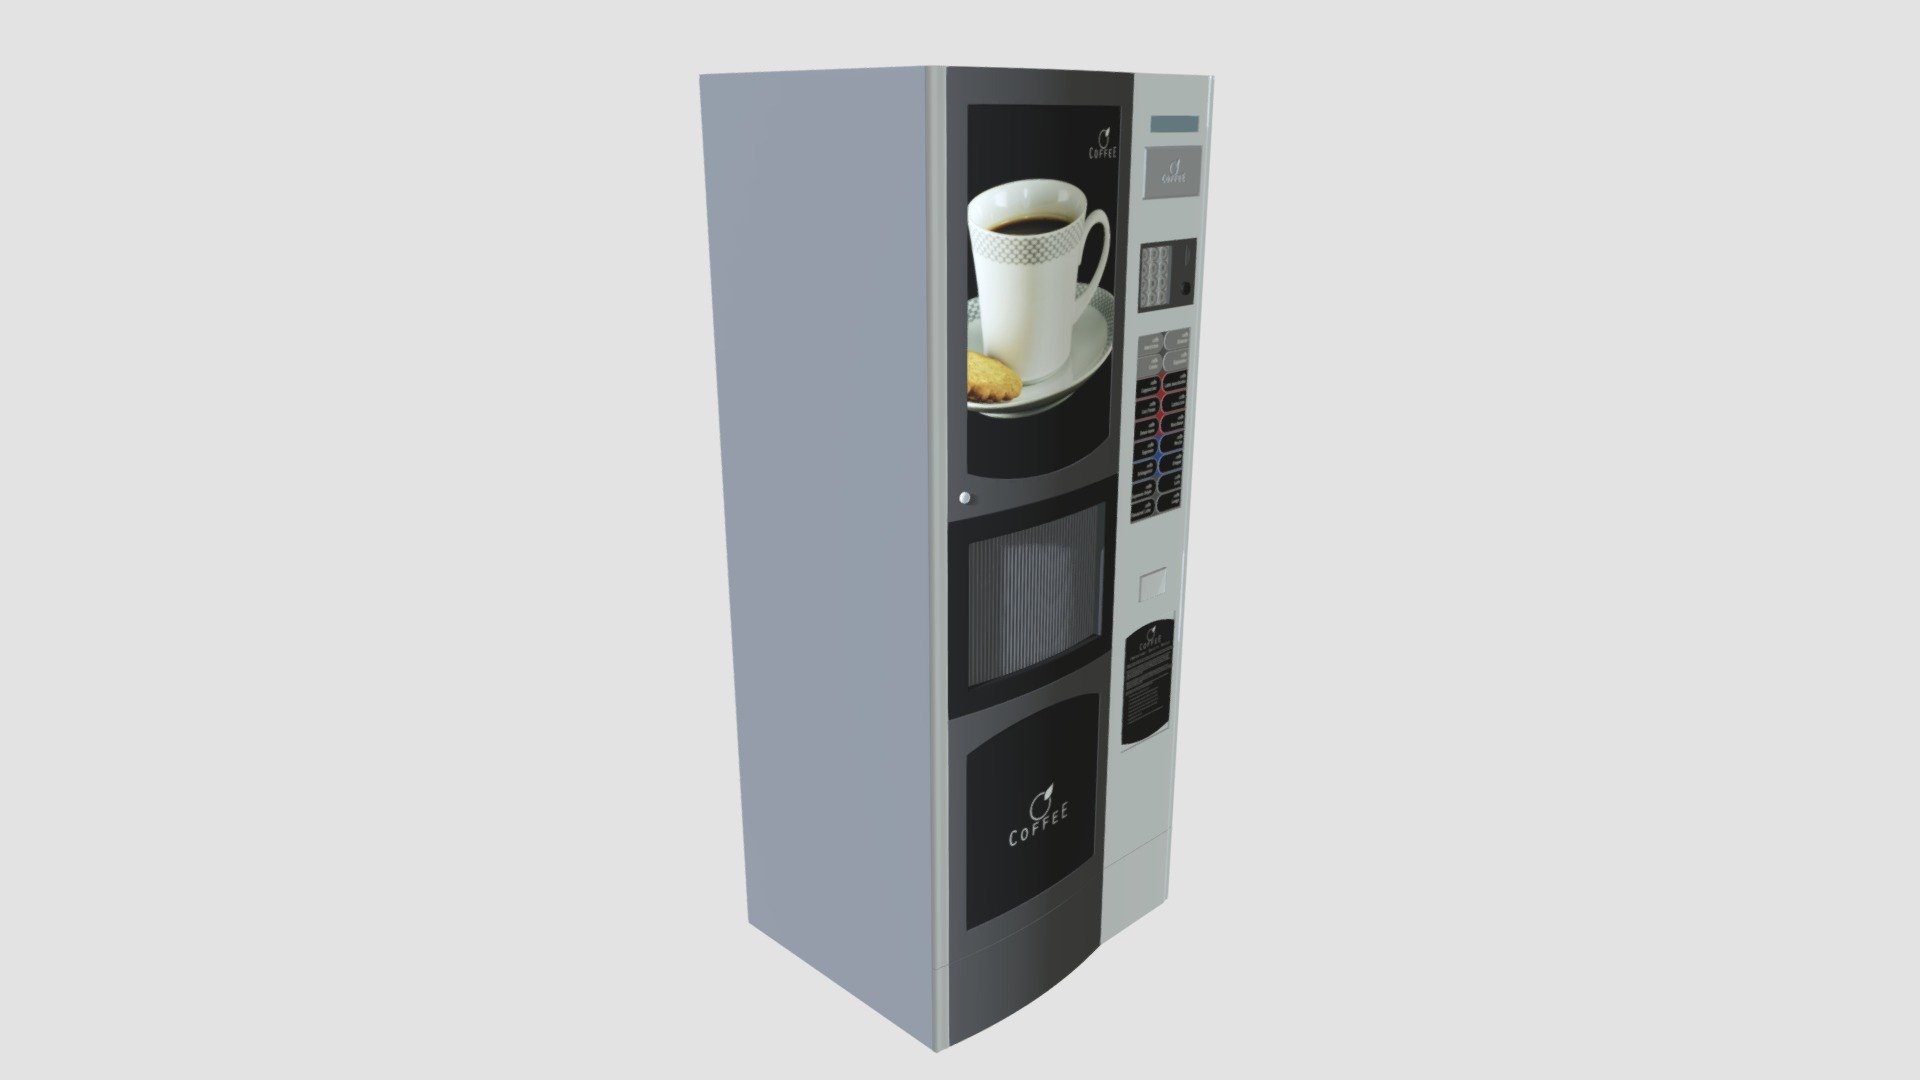 Highly detailed model of coffee vending machine with all textures, shaders and materials. It is ready to use, just put it into your scene 3d model